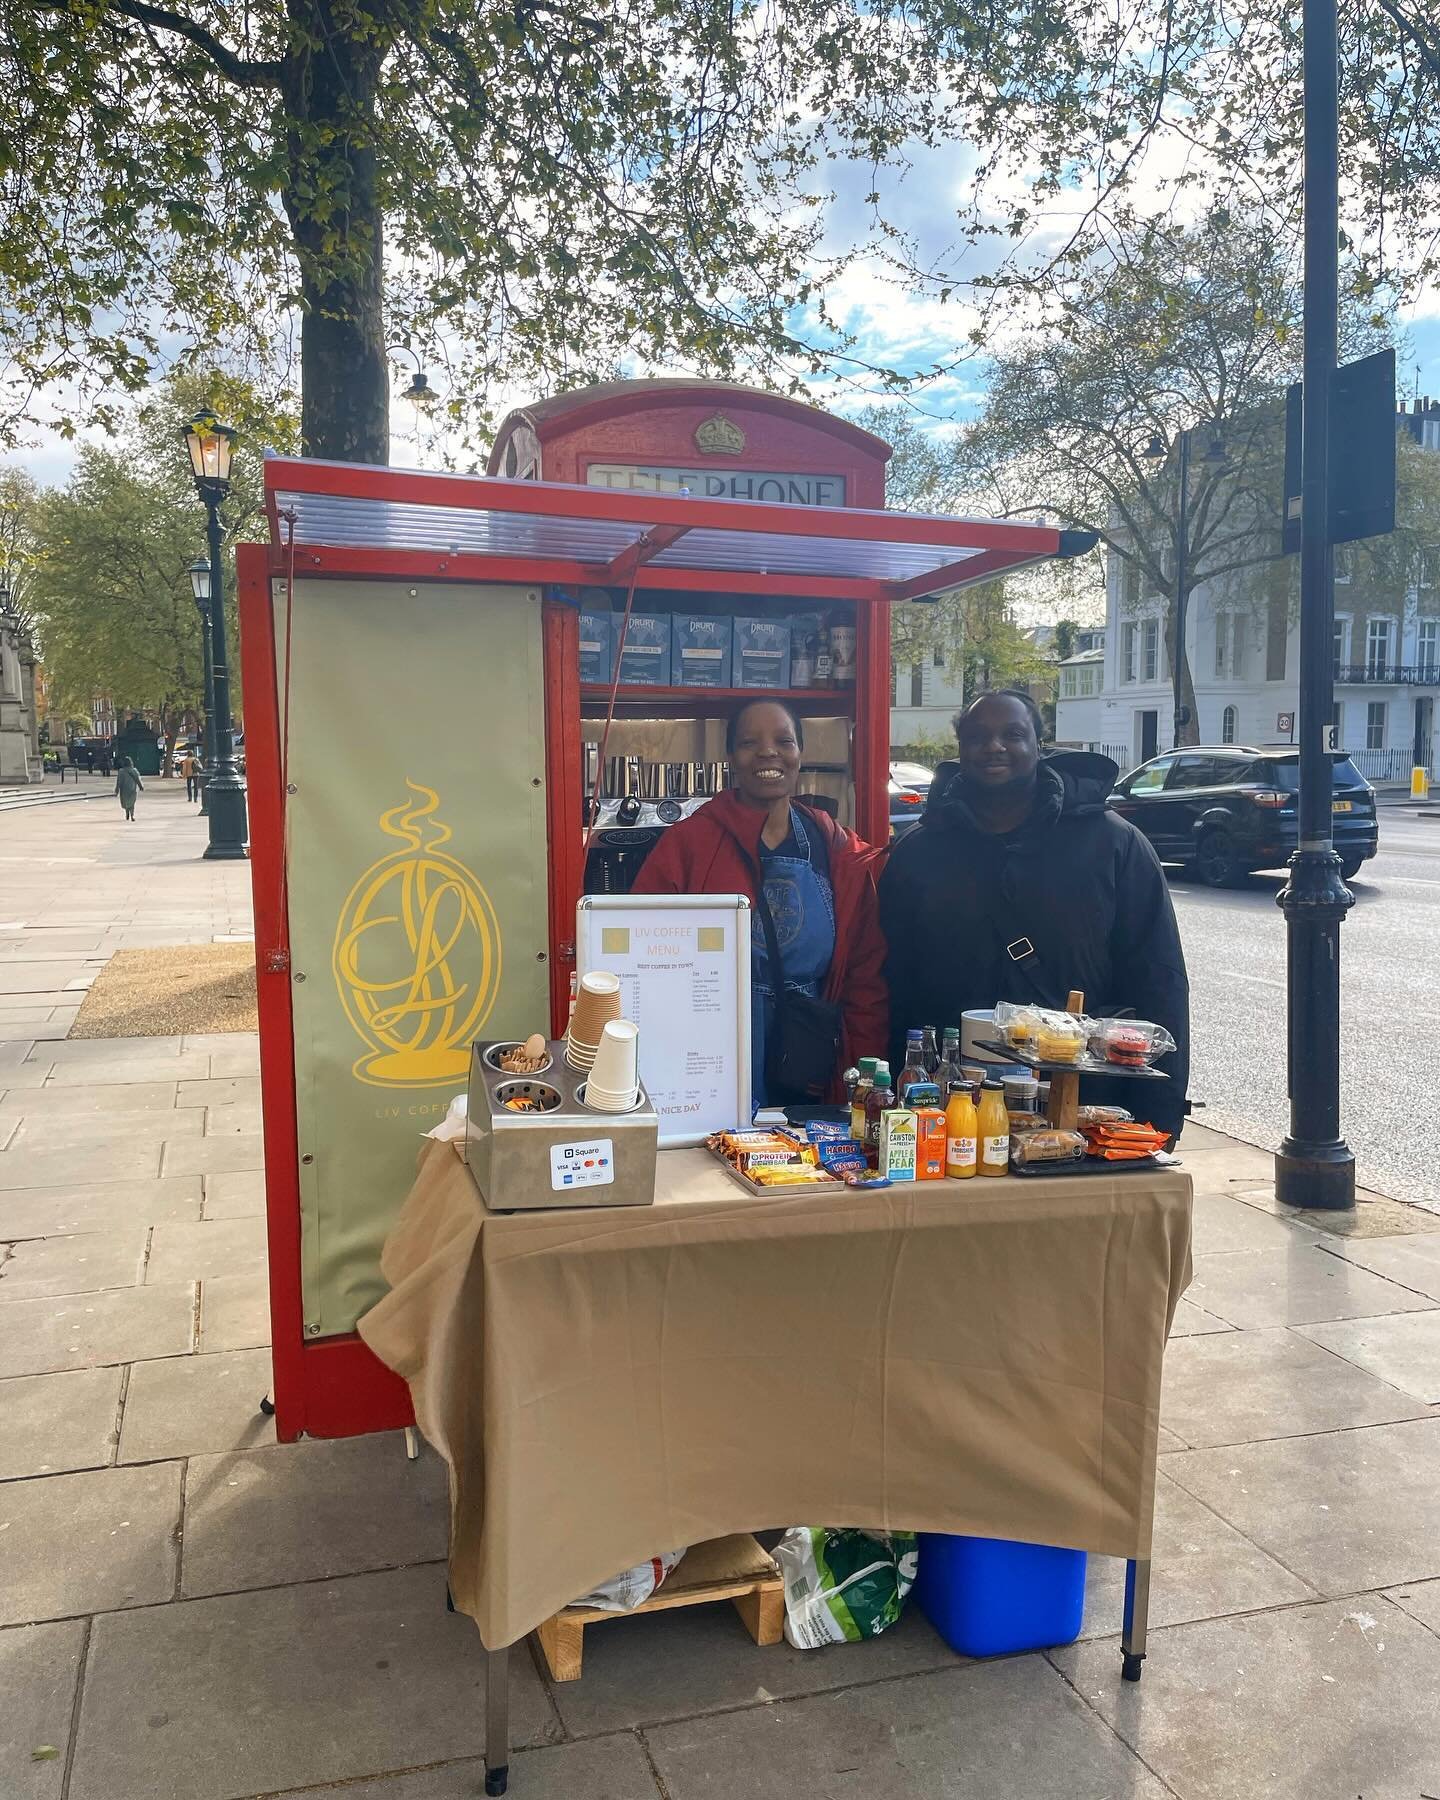 Have you visited this cute new phone box cafe outside the V&amp;A Museum?

Liv Coffee, run by the delightful Livinia with help from her son Darrell, opened last week in one of London&rsquo;s historic red phone boxes. They serve a variety of teas, cof